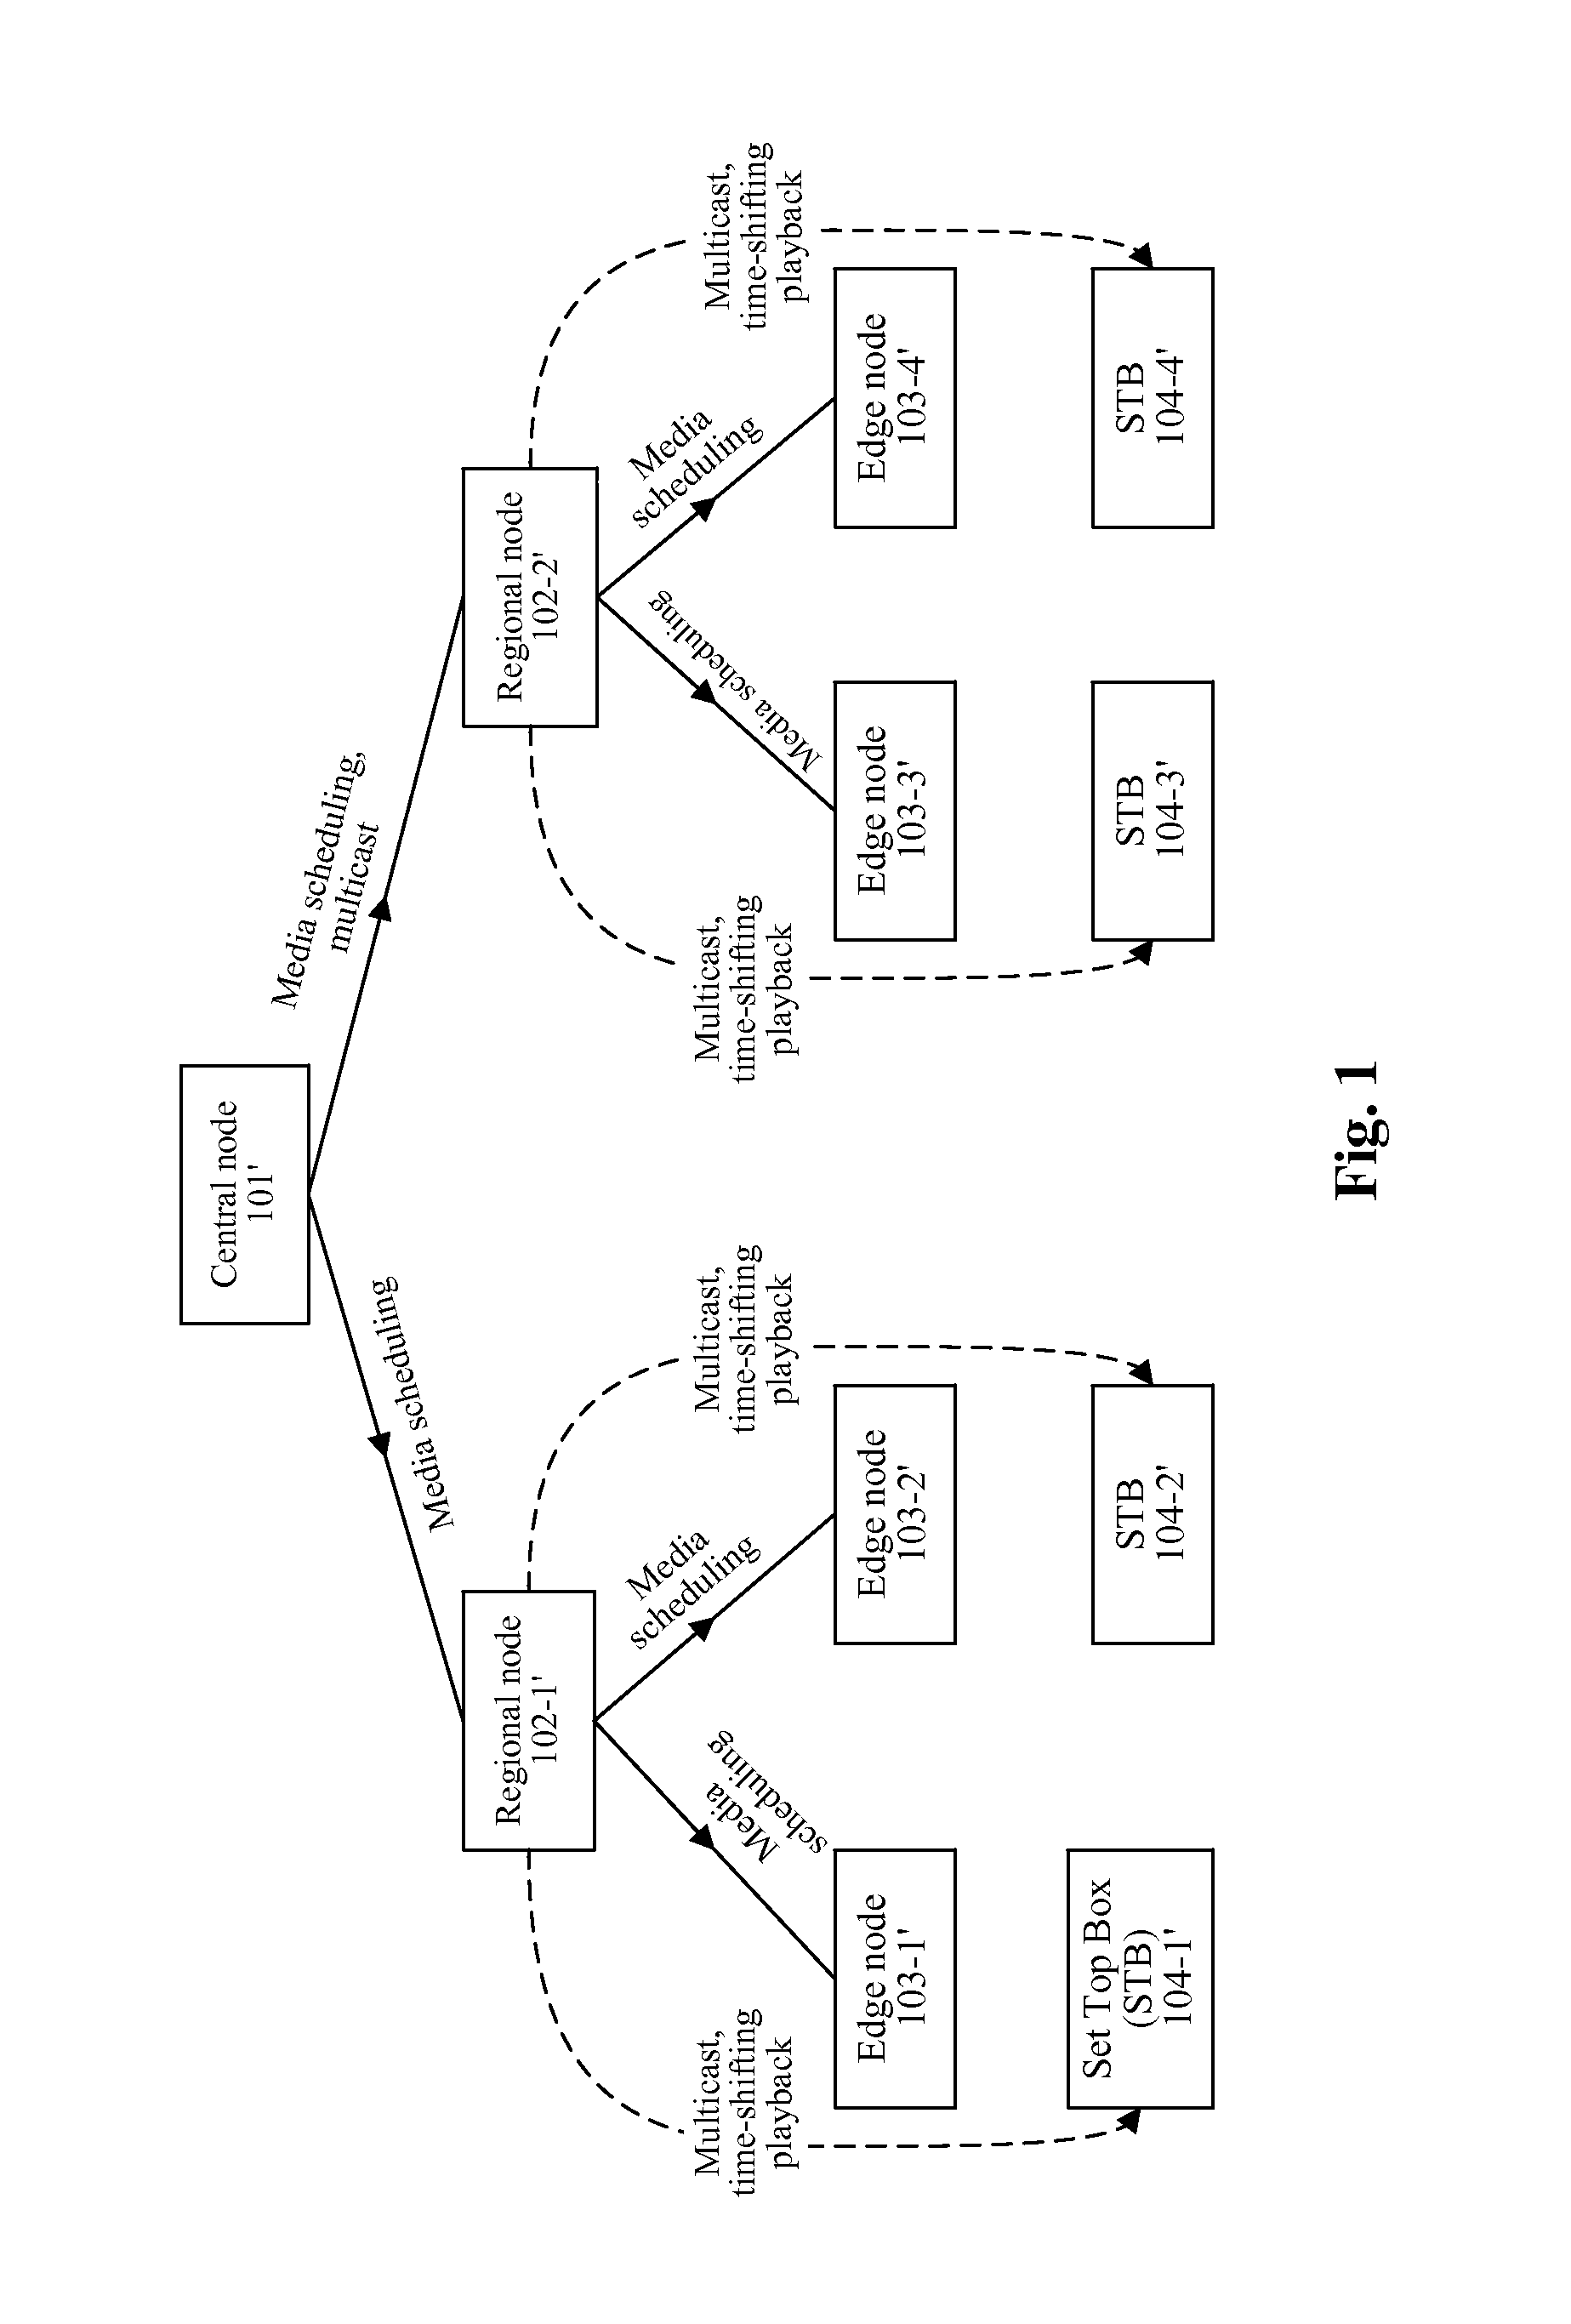 Network-wide storing and scheduling method and system for internet protocol television